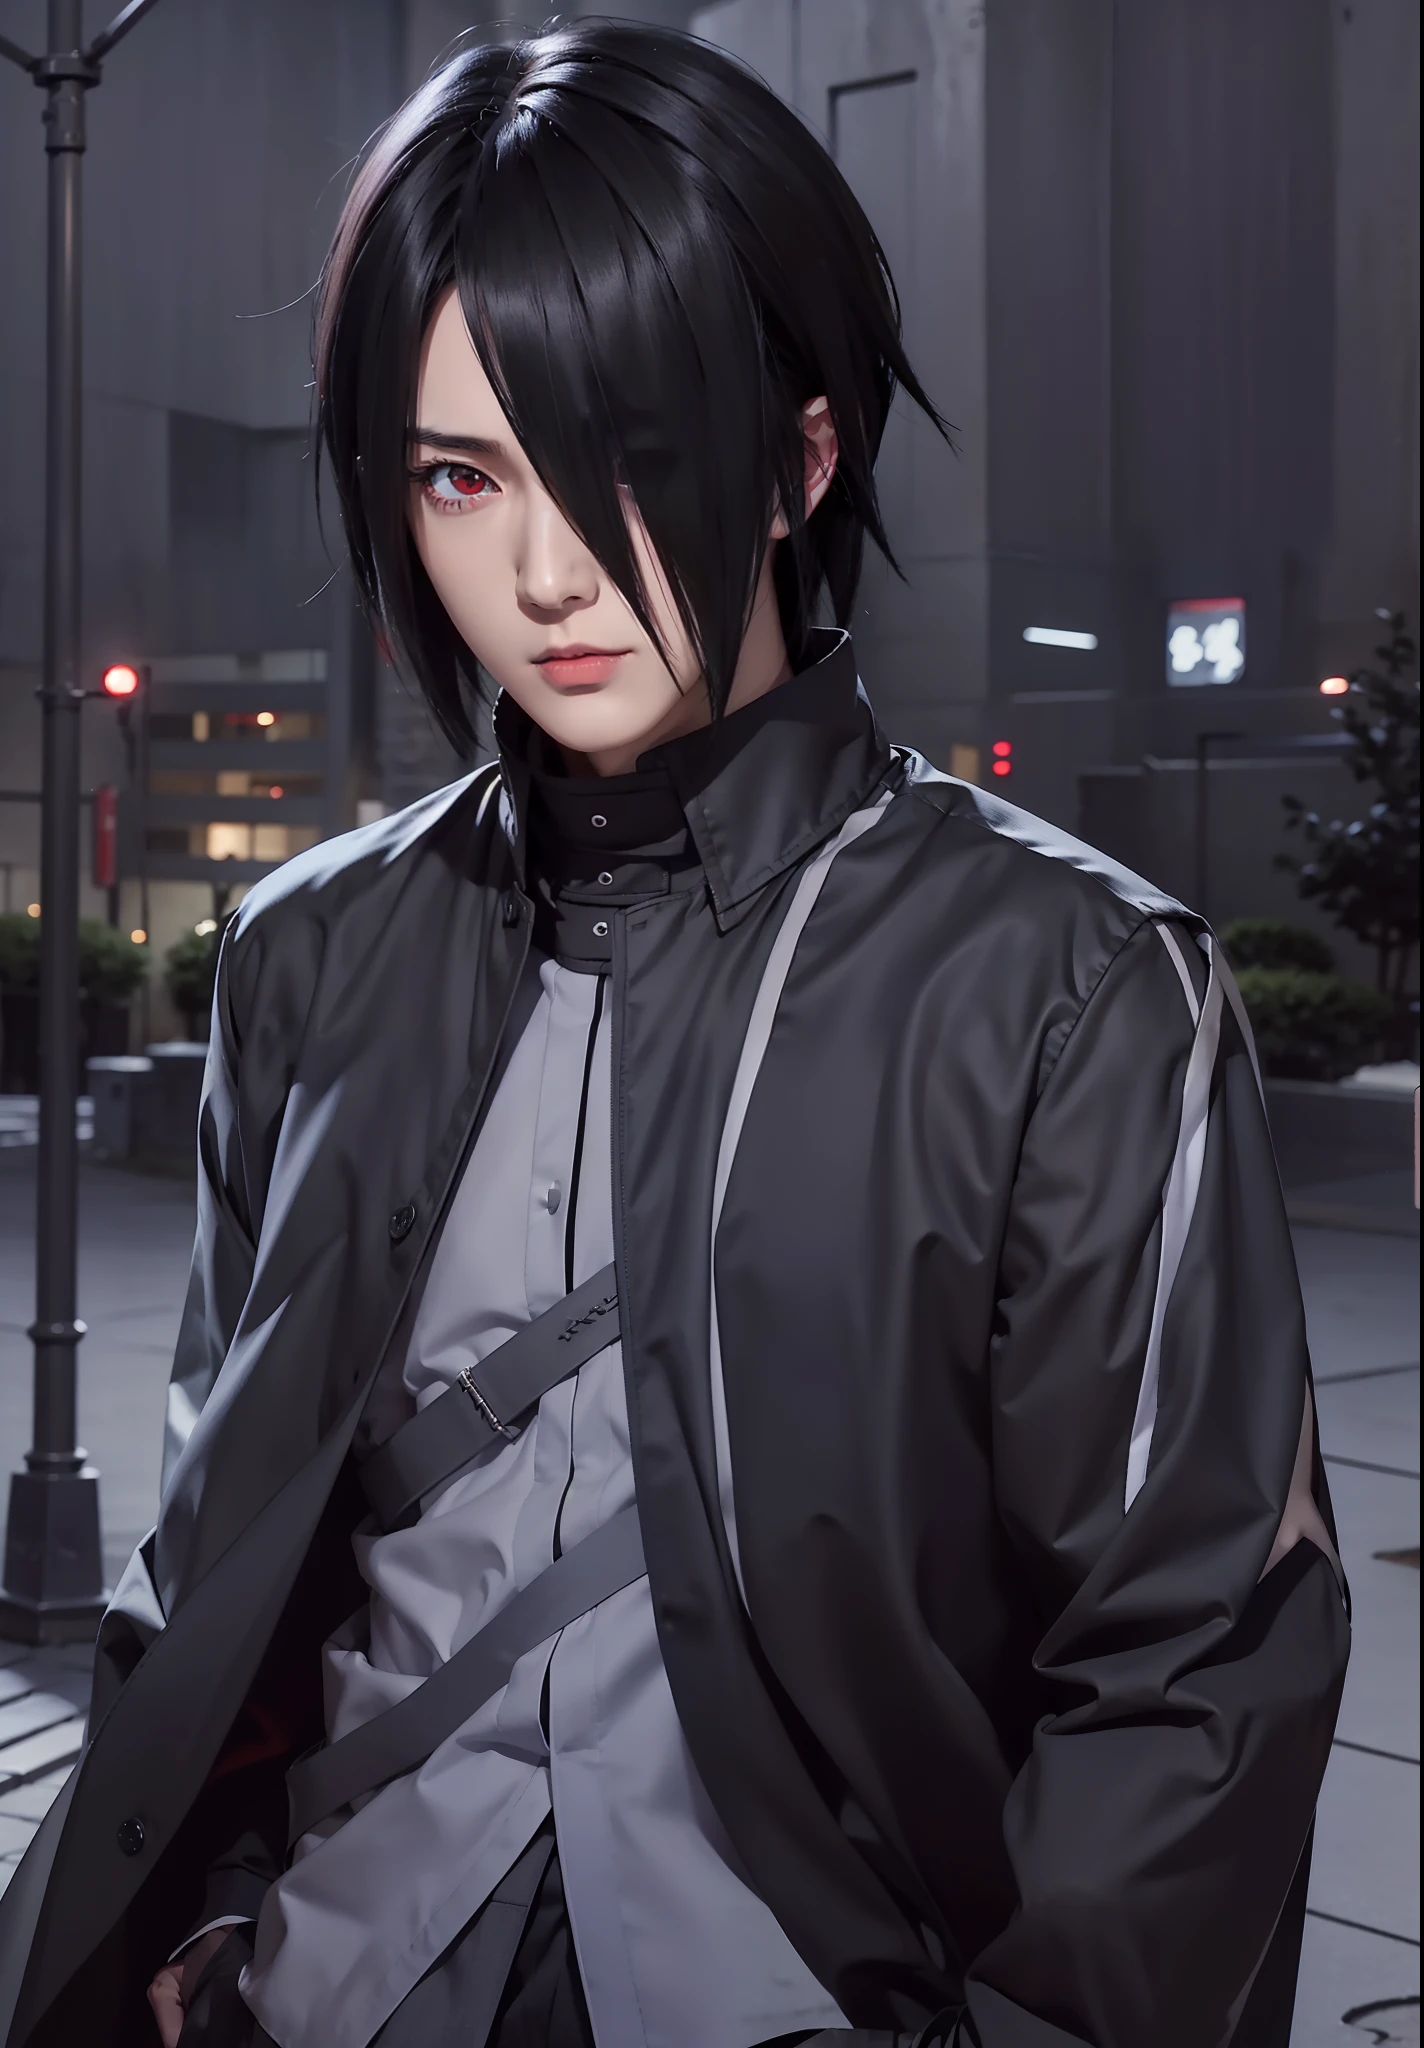 1man, uchiha sasuke in anime naruto, short hair , black hair, red eyes, handsome, black clothes, realistic clothes, detail clothes, outdoor background, ultra detail, realistic